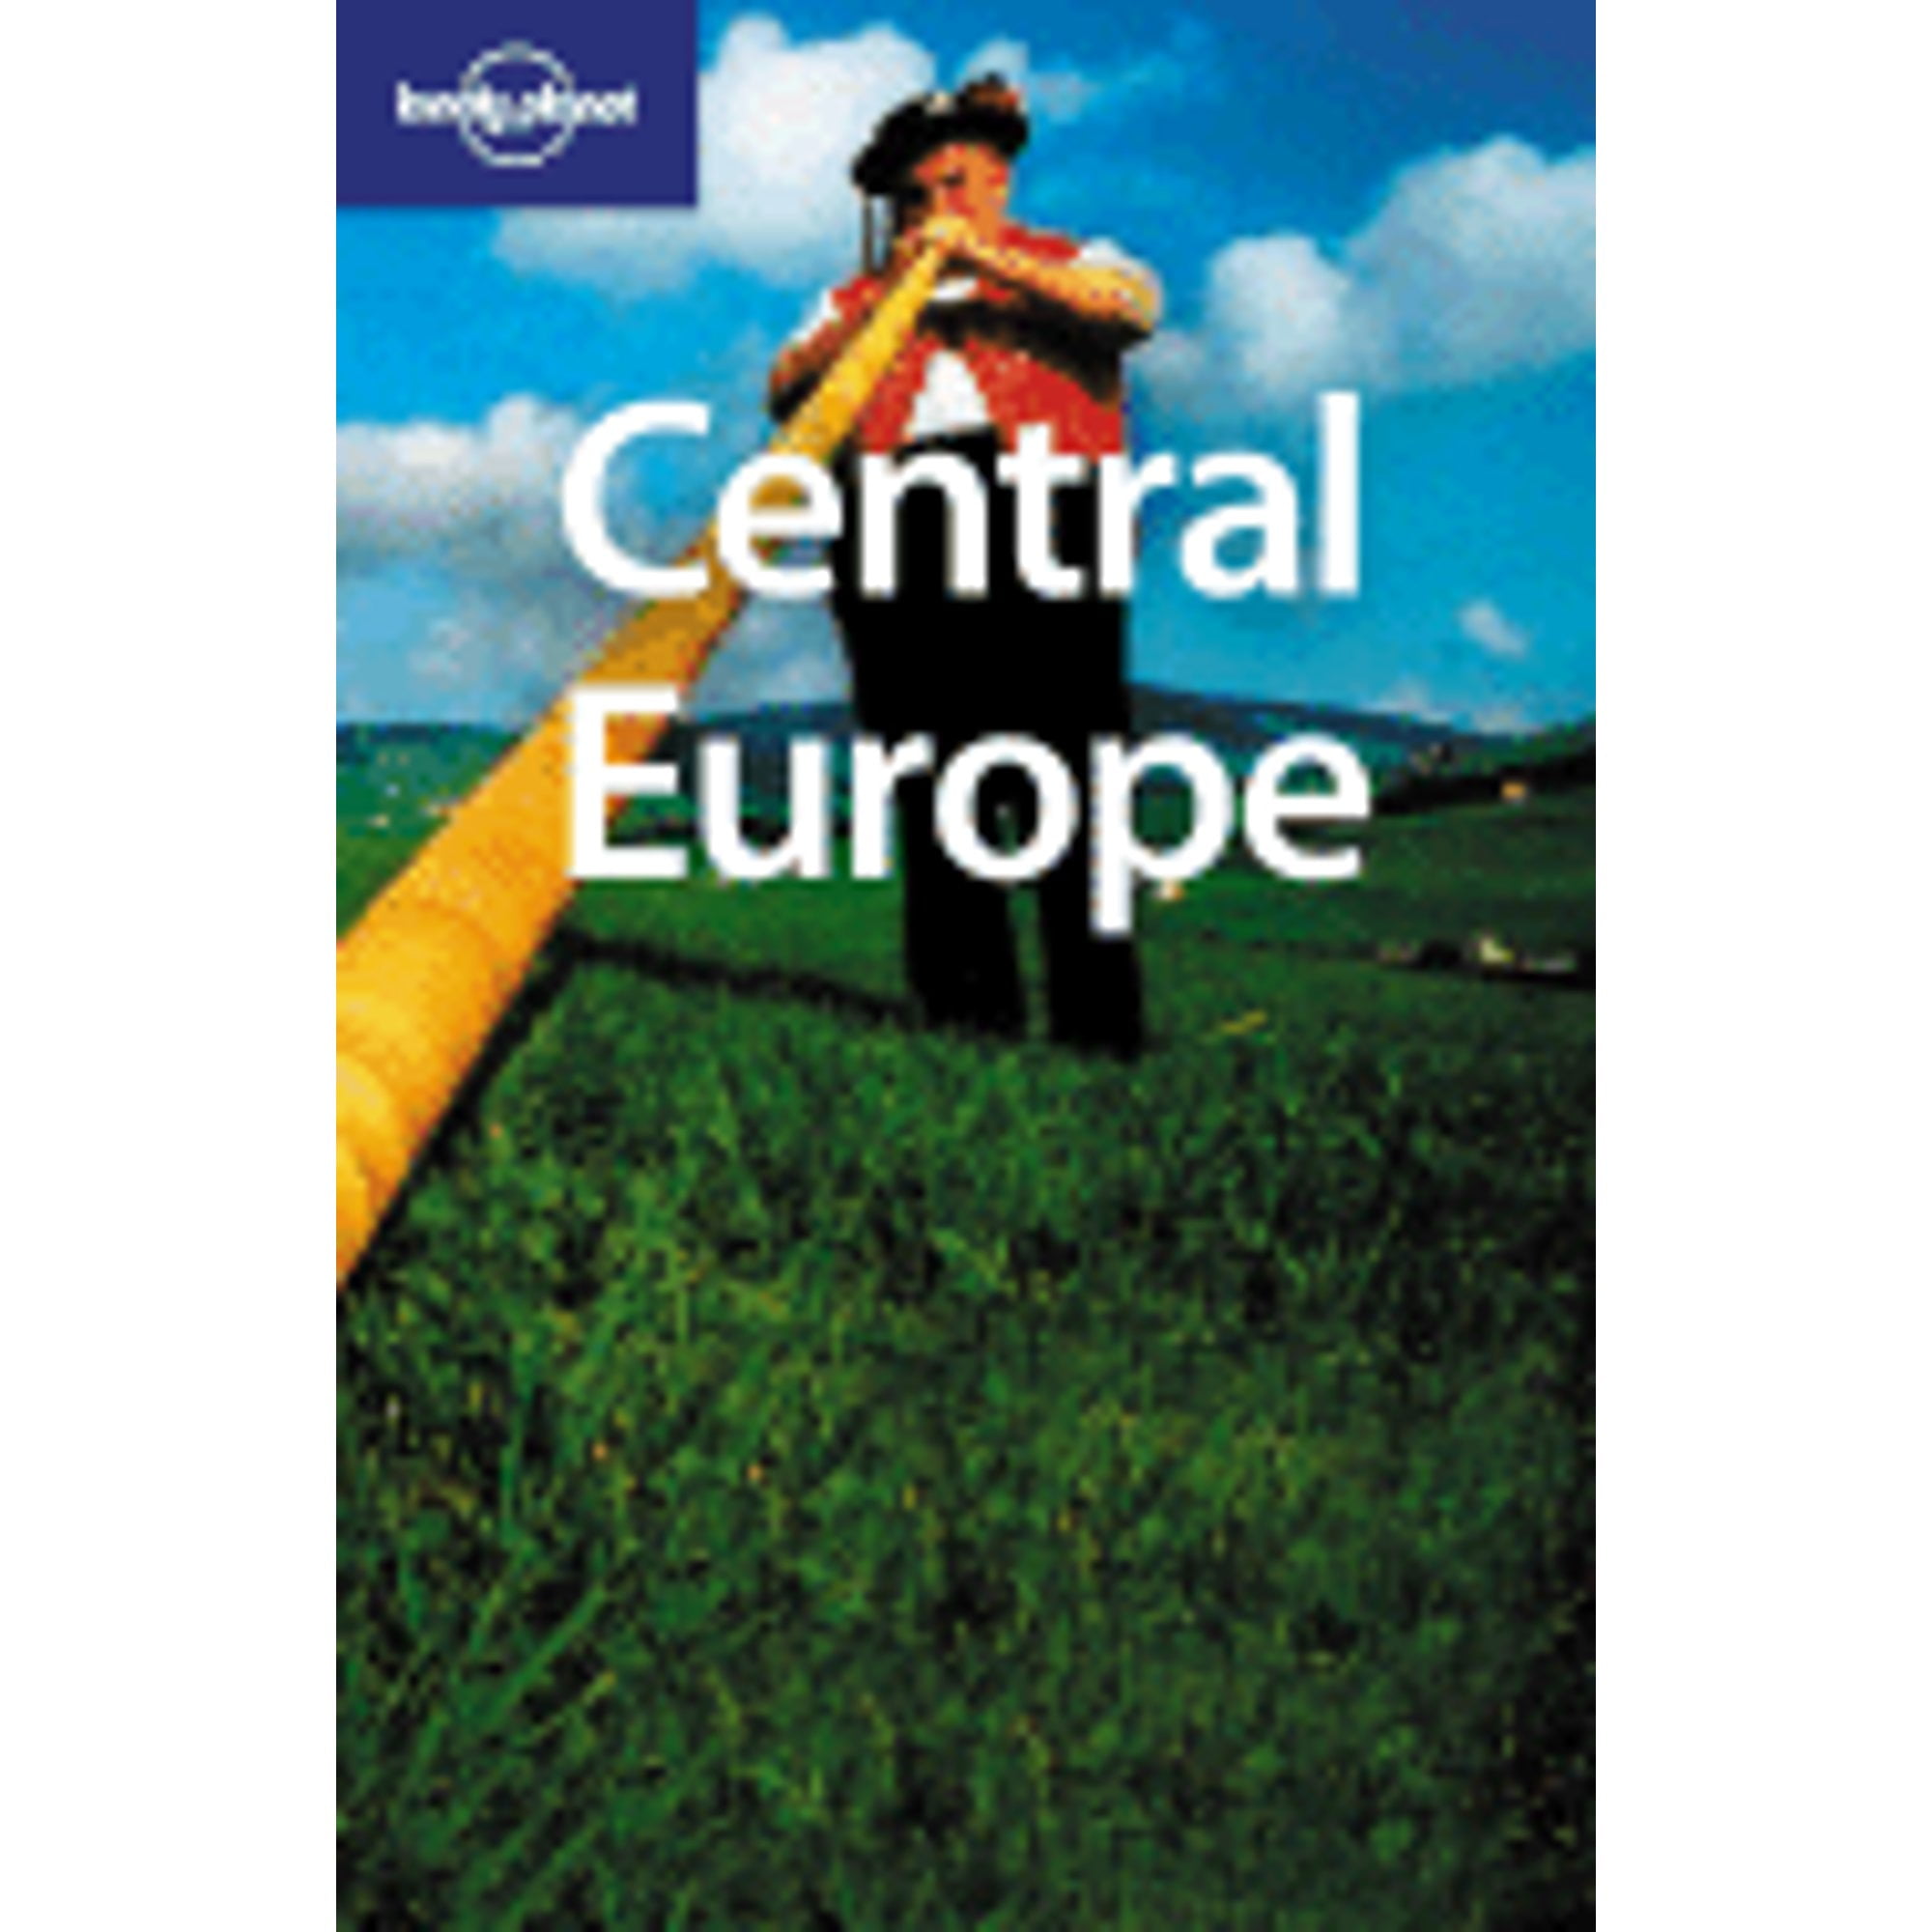 Pre-Owned　Lonely　Europe　Brett　Smitz,　Paul　Anderson,　Planet　9781741043013)　(Paperback　Aaron　Atkinson　Central　by